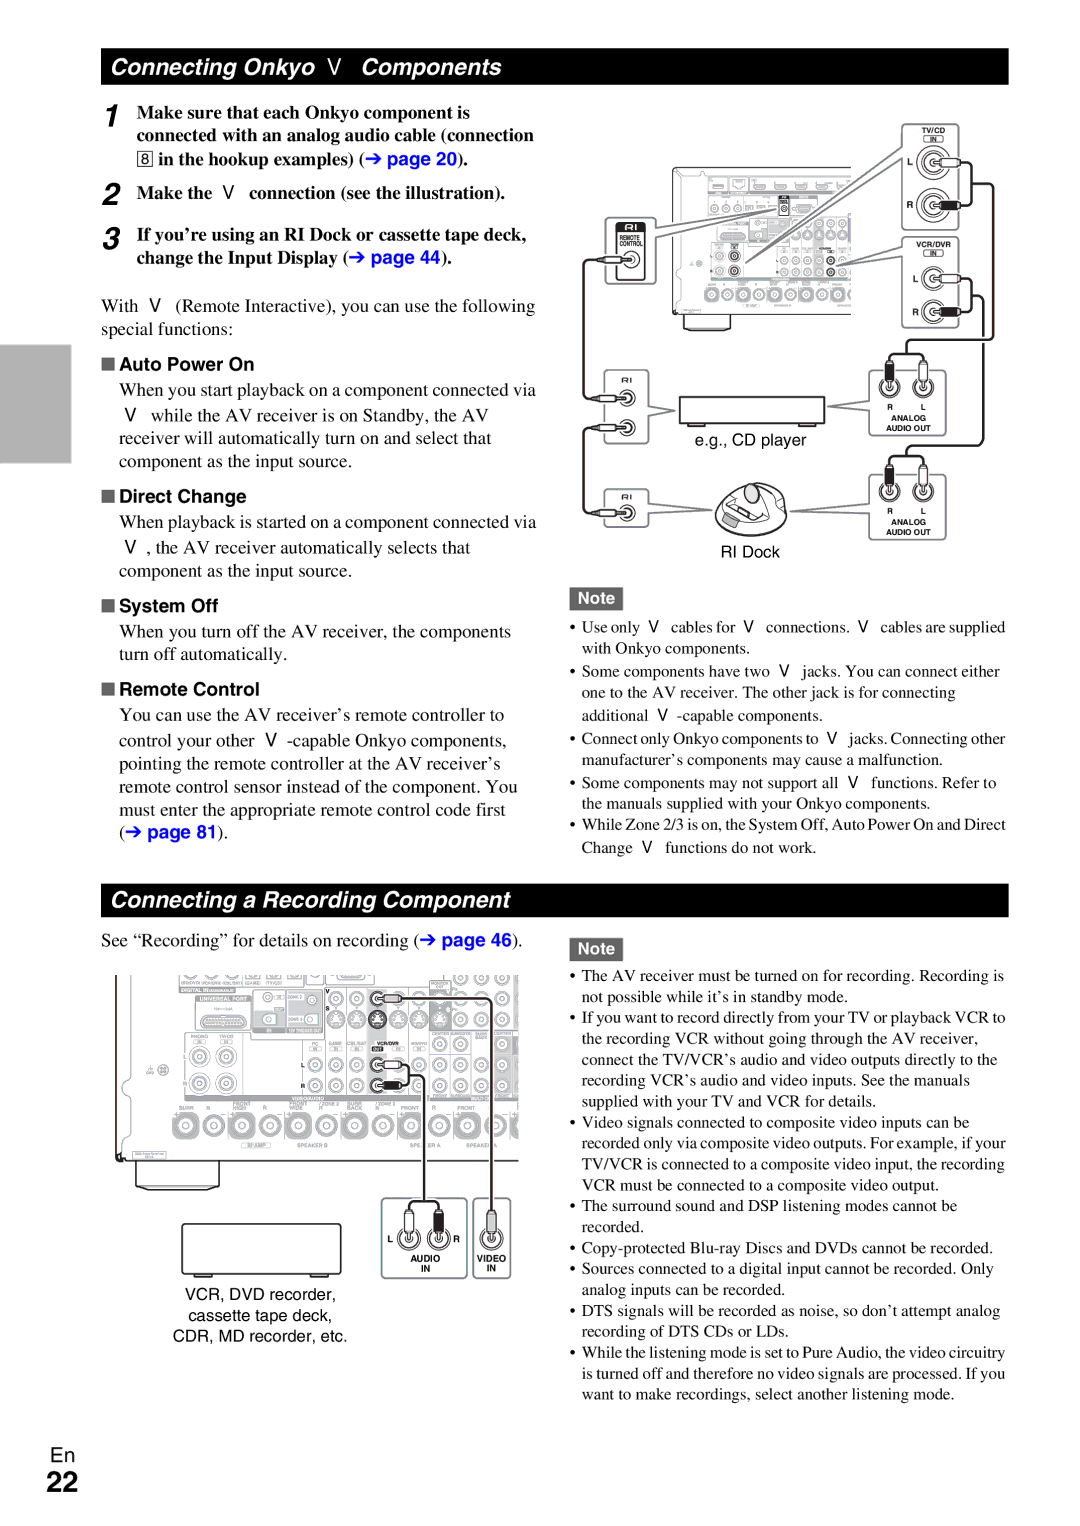 Onkyo TX-NR5009 instruction manual Connecting Onkyo uComponents, Connecting a Recording Component 